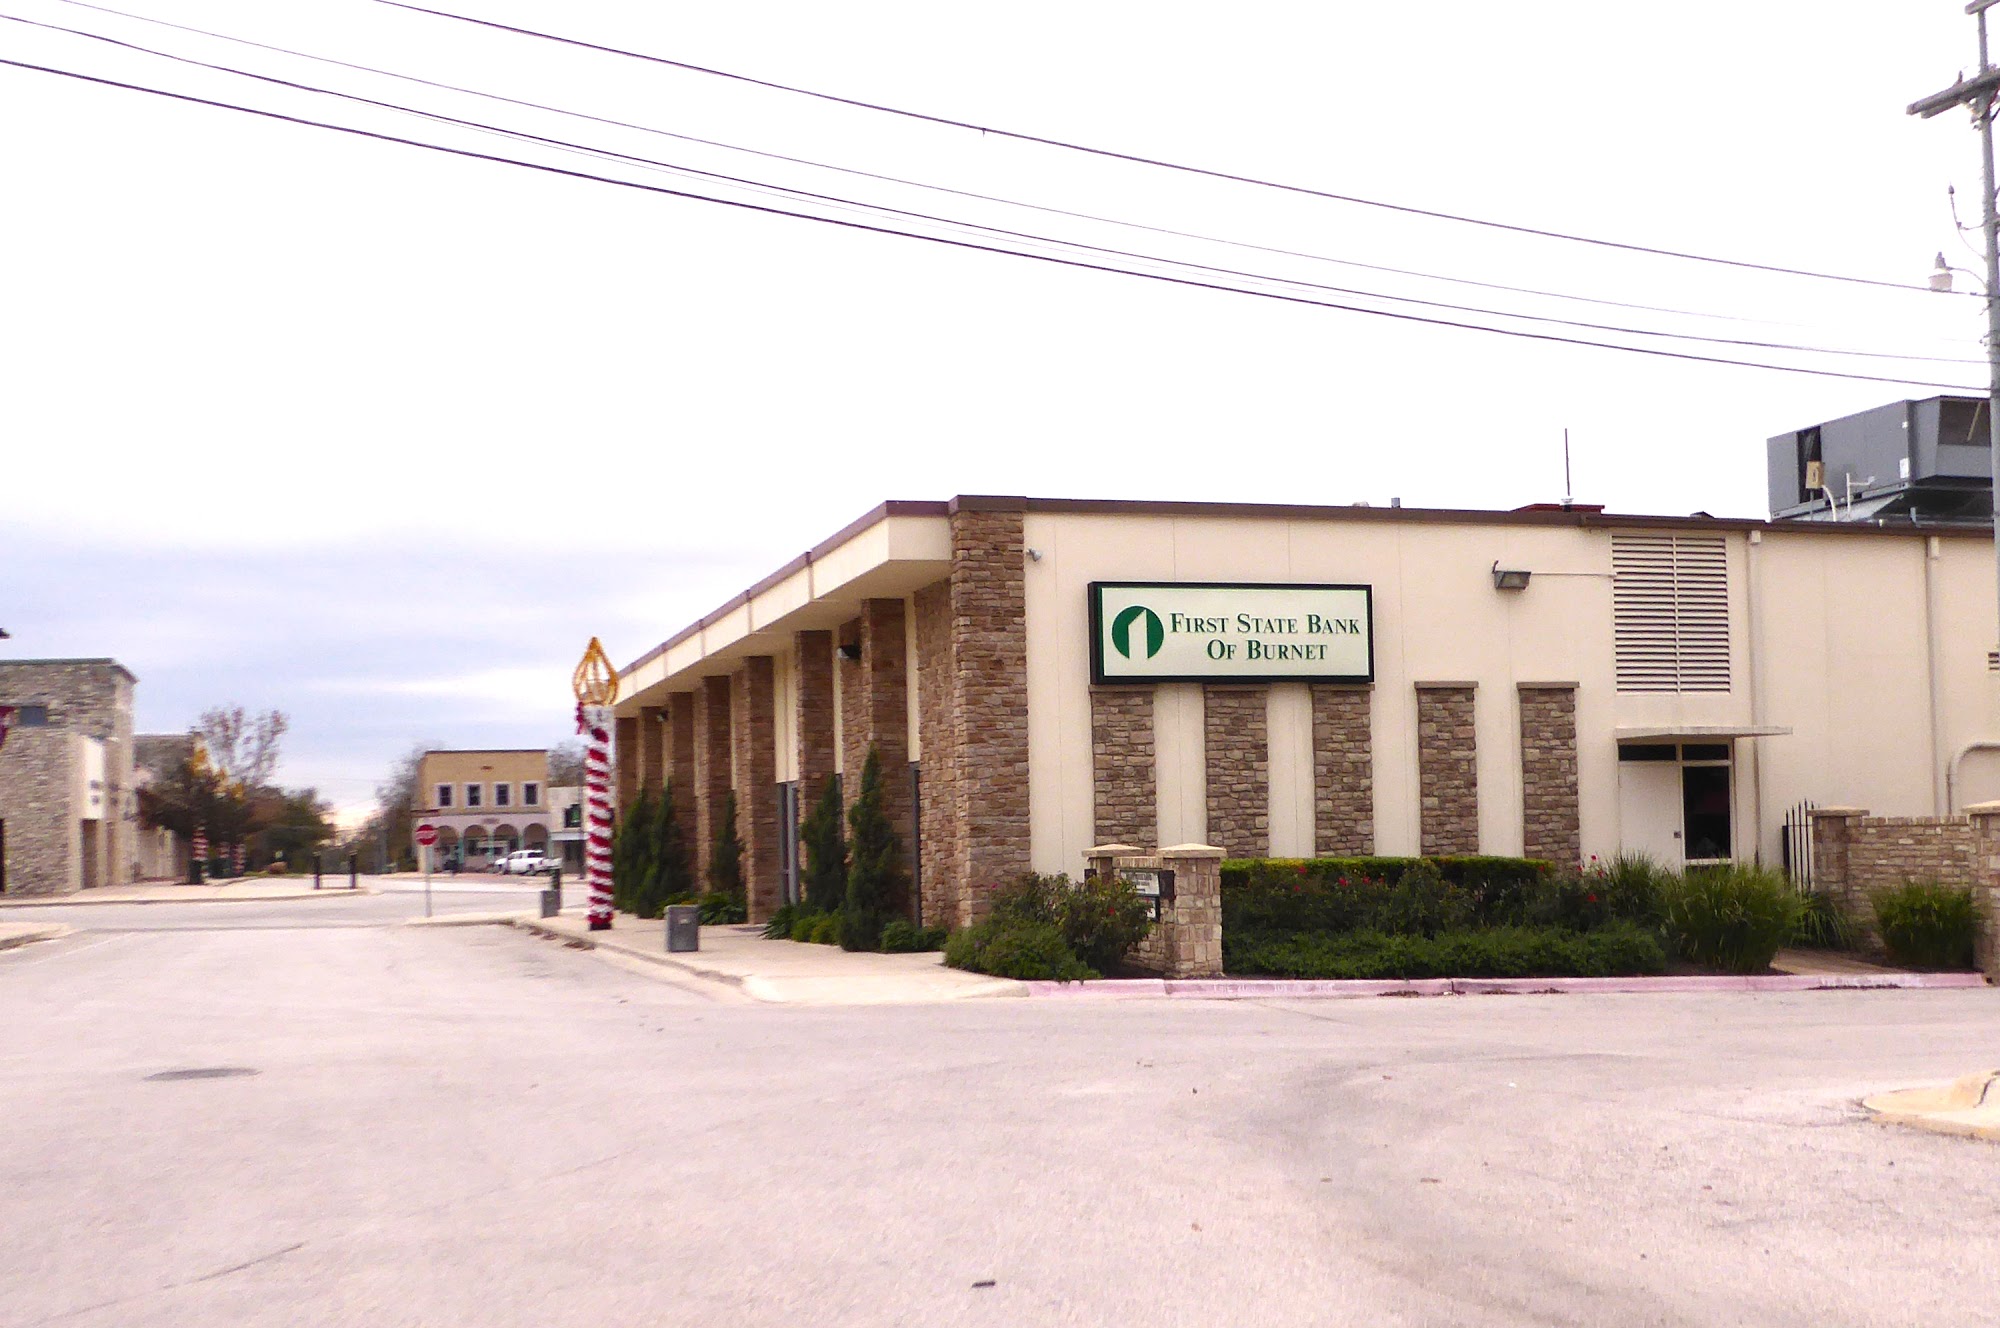 First State Bank of Burnet